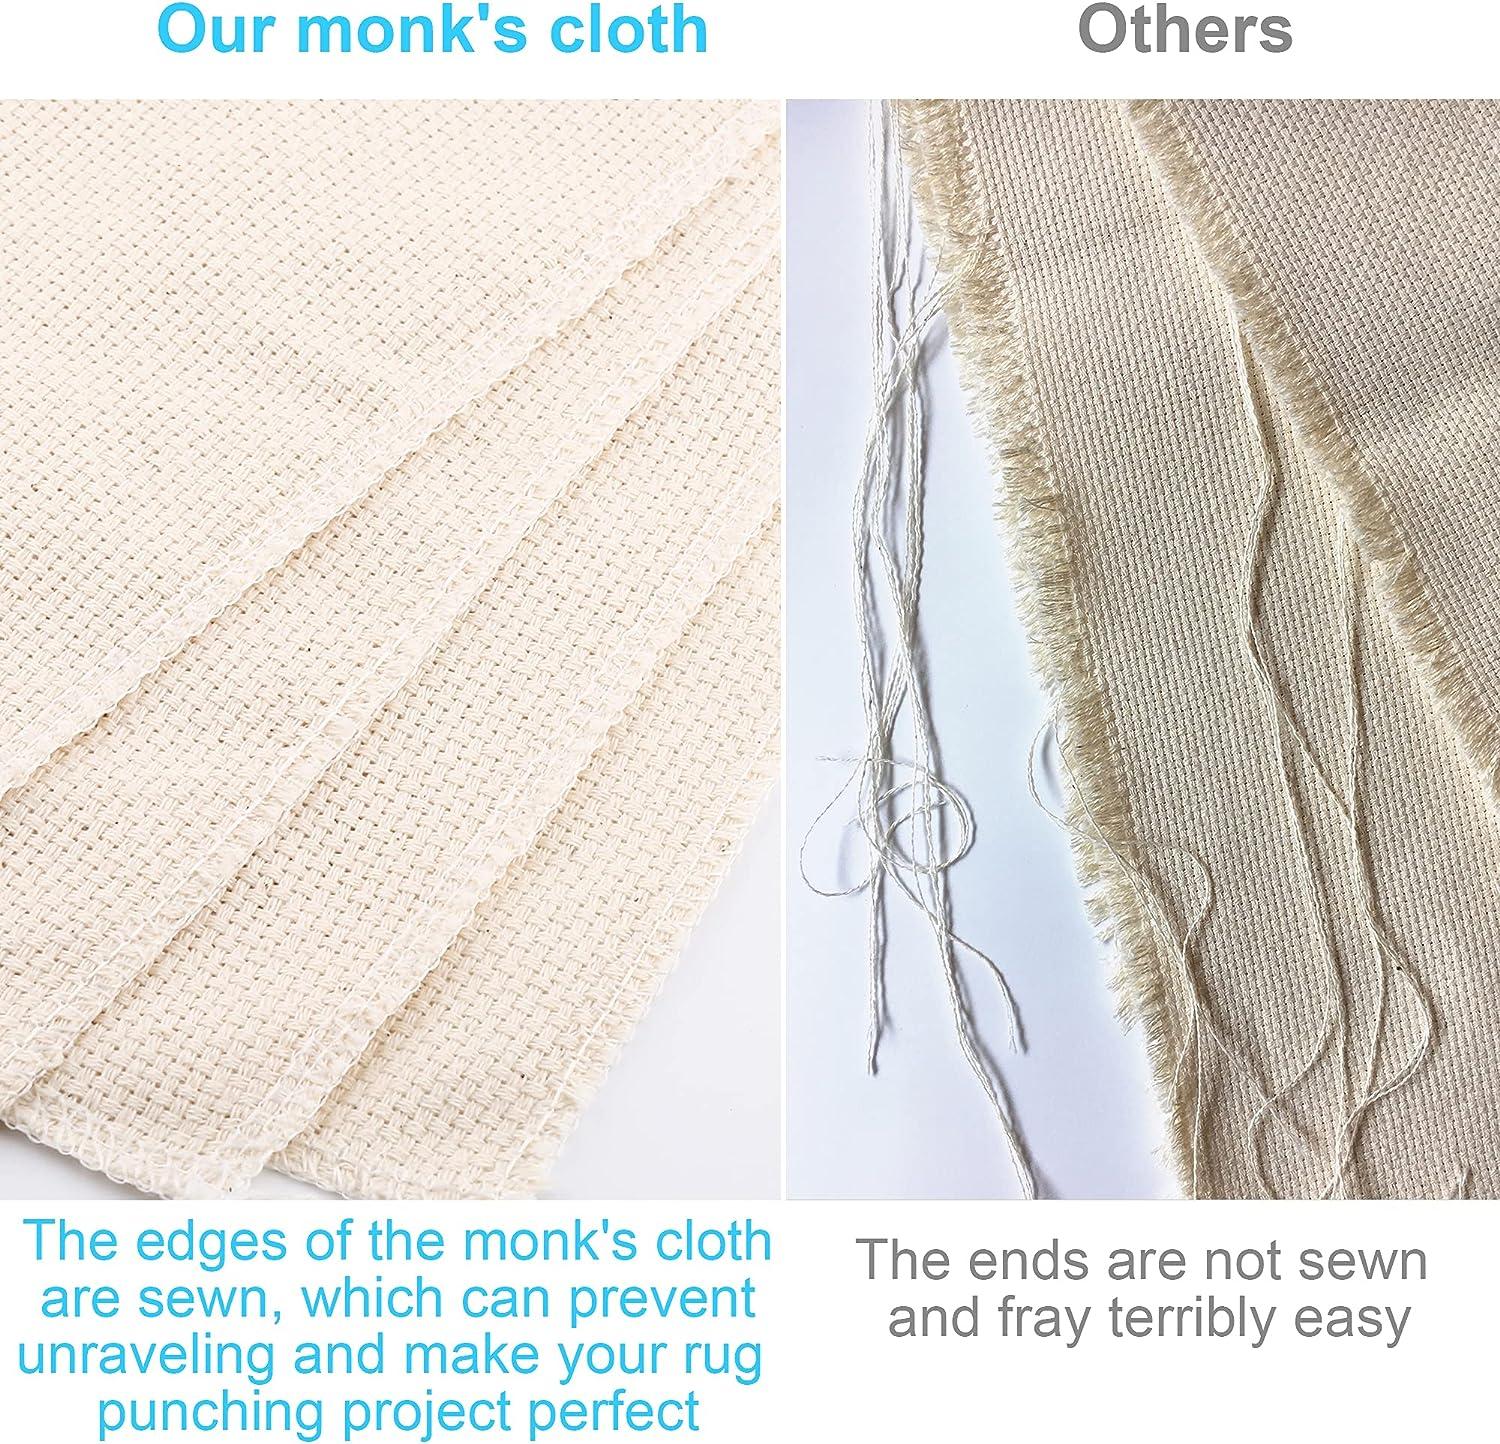 Monks Cloth Fabric & Embroidery Frame Set Punch Needle Rag Rug DIY Craft -  Knot Knot Macrame